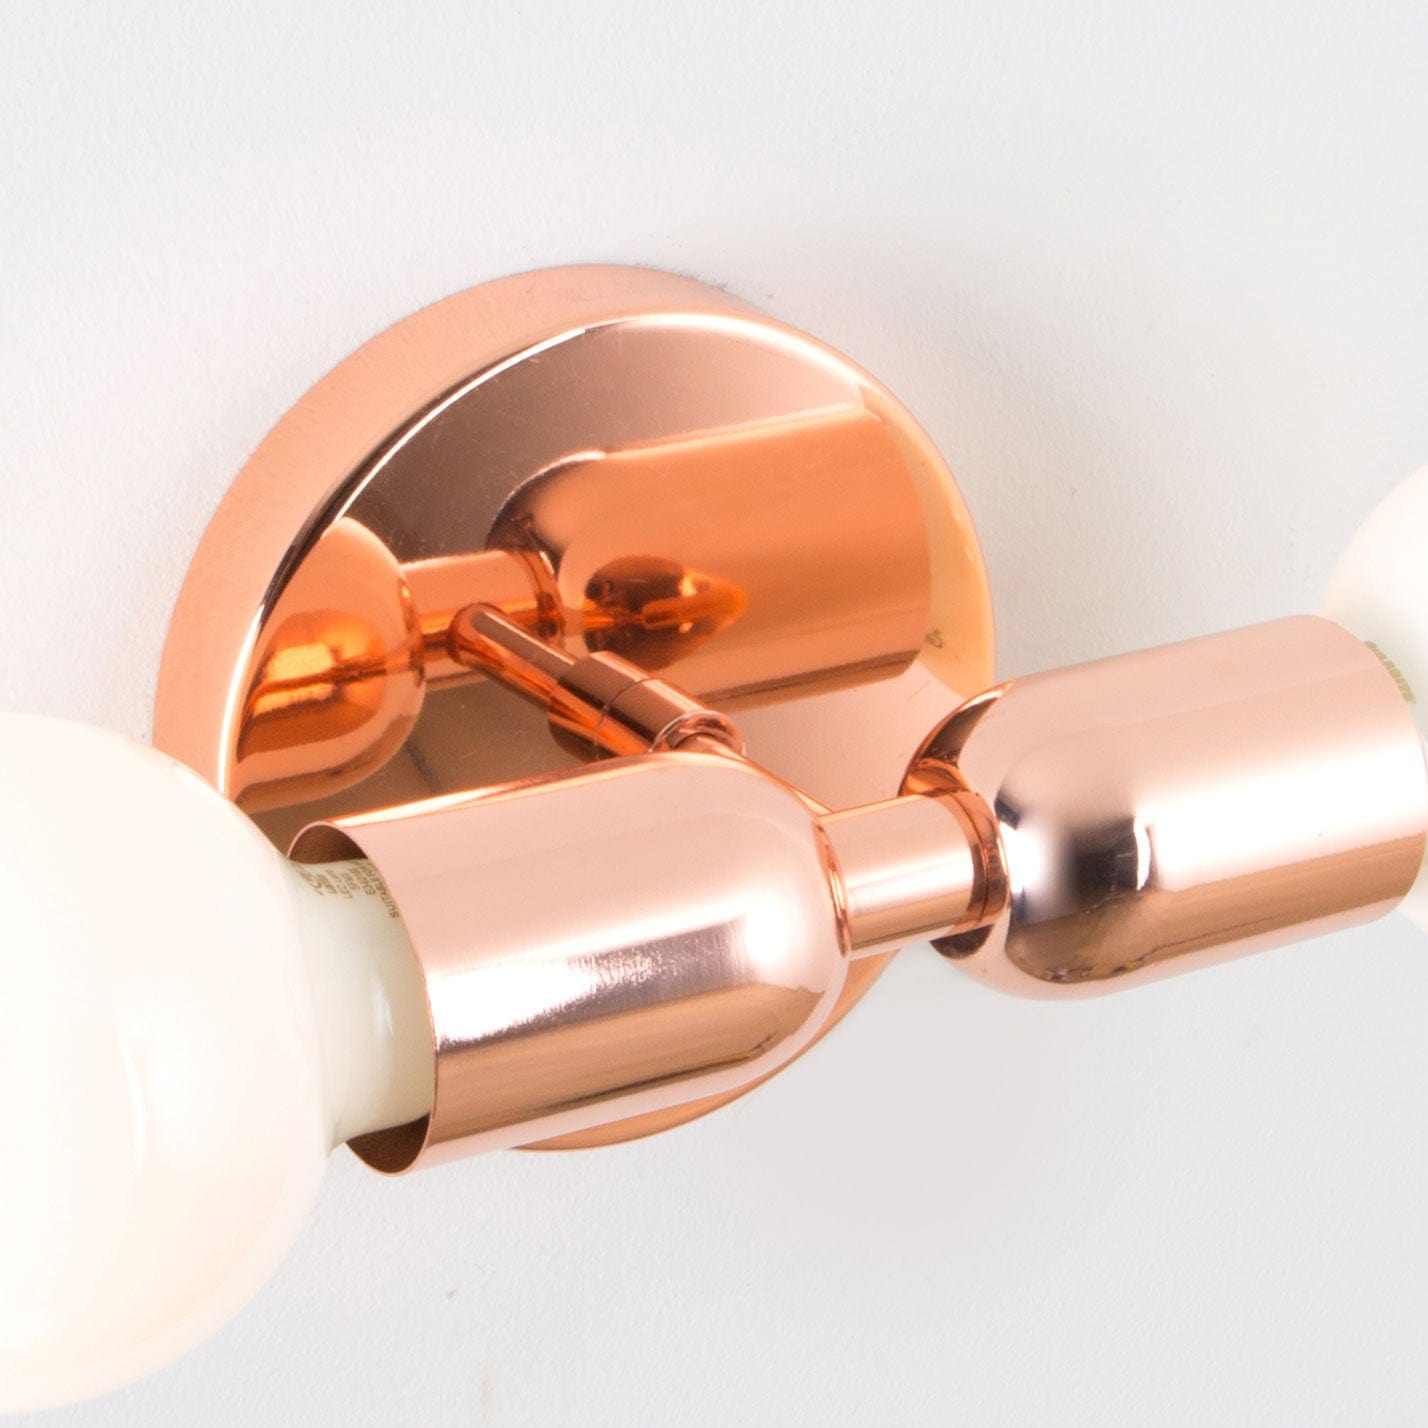 Junction Mini Duo Sconce